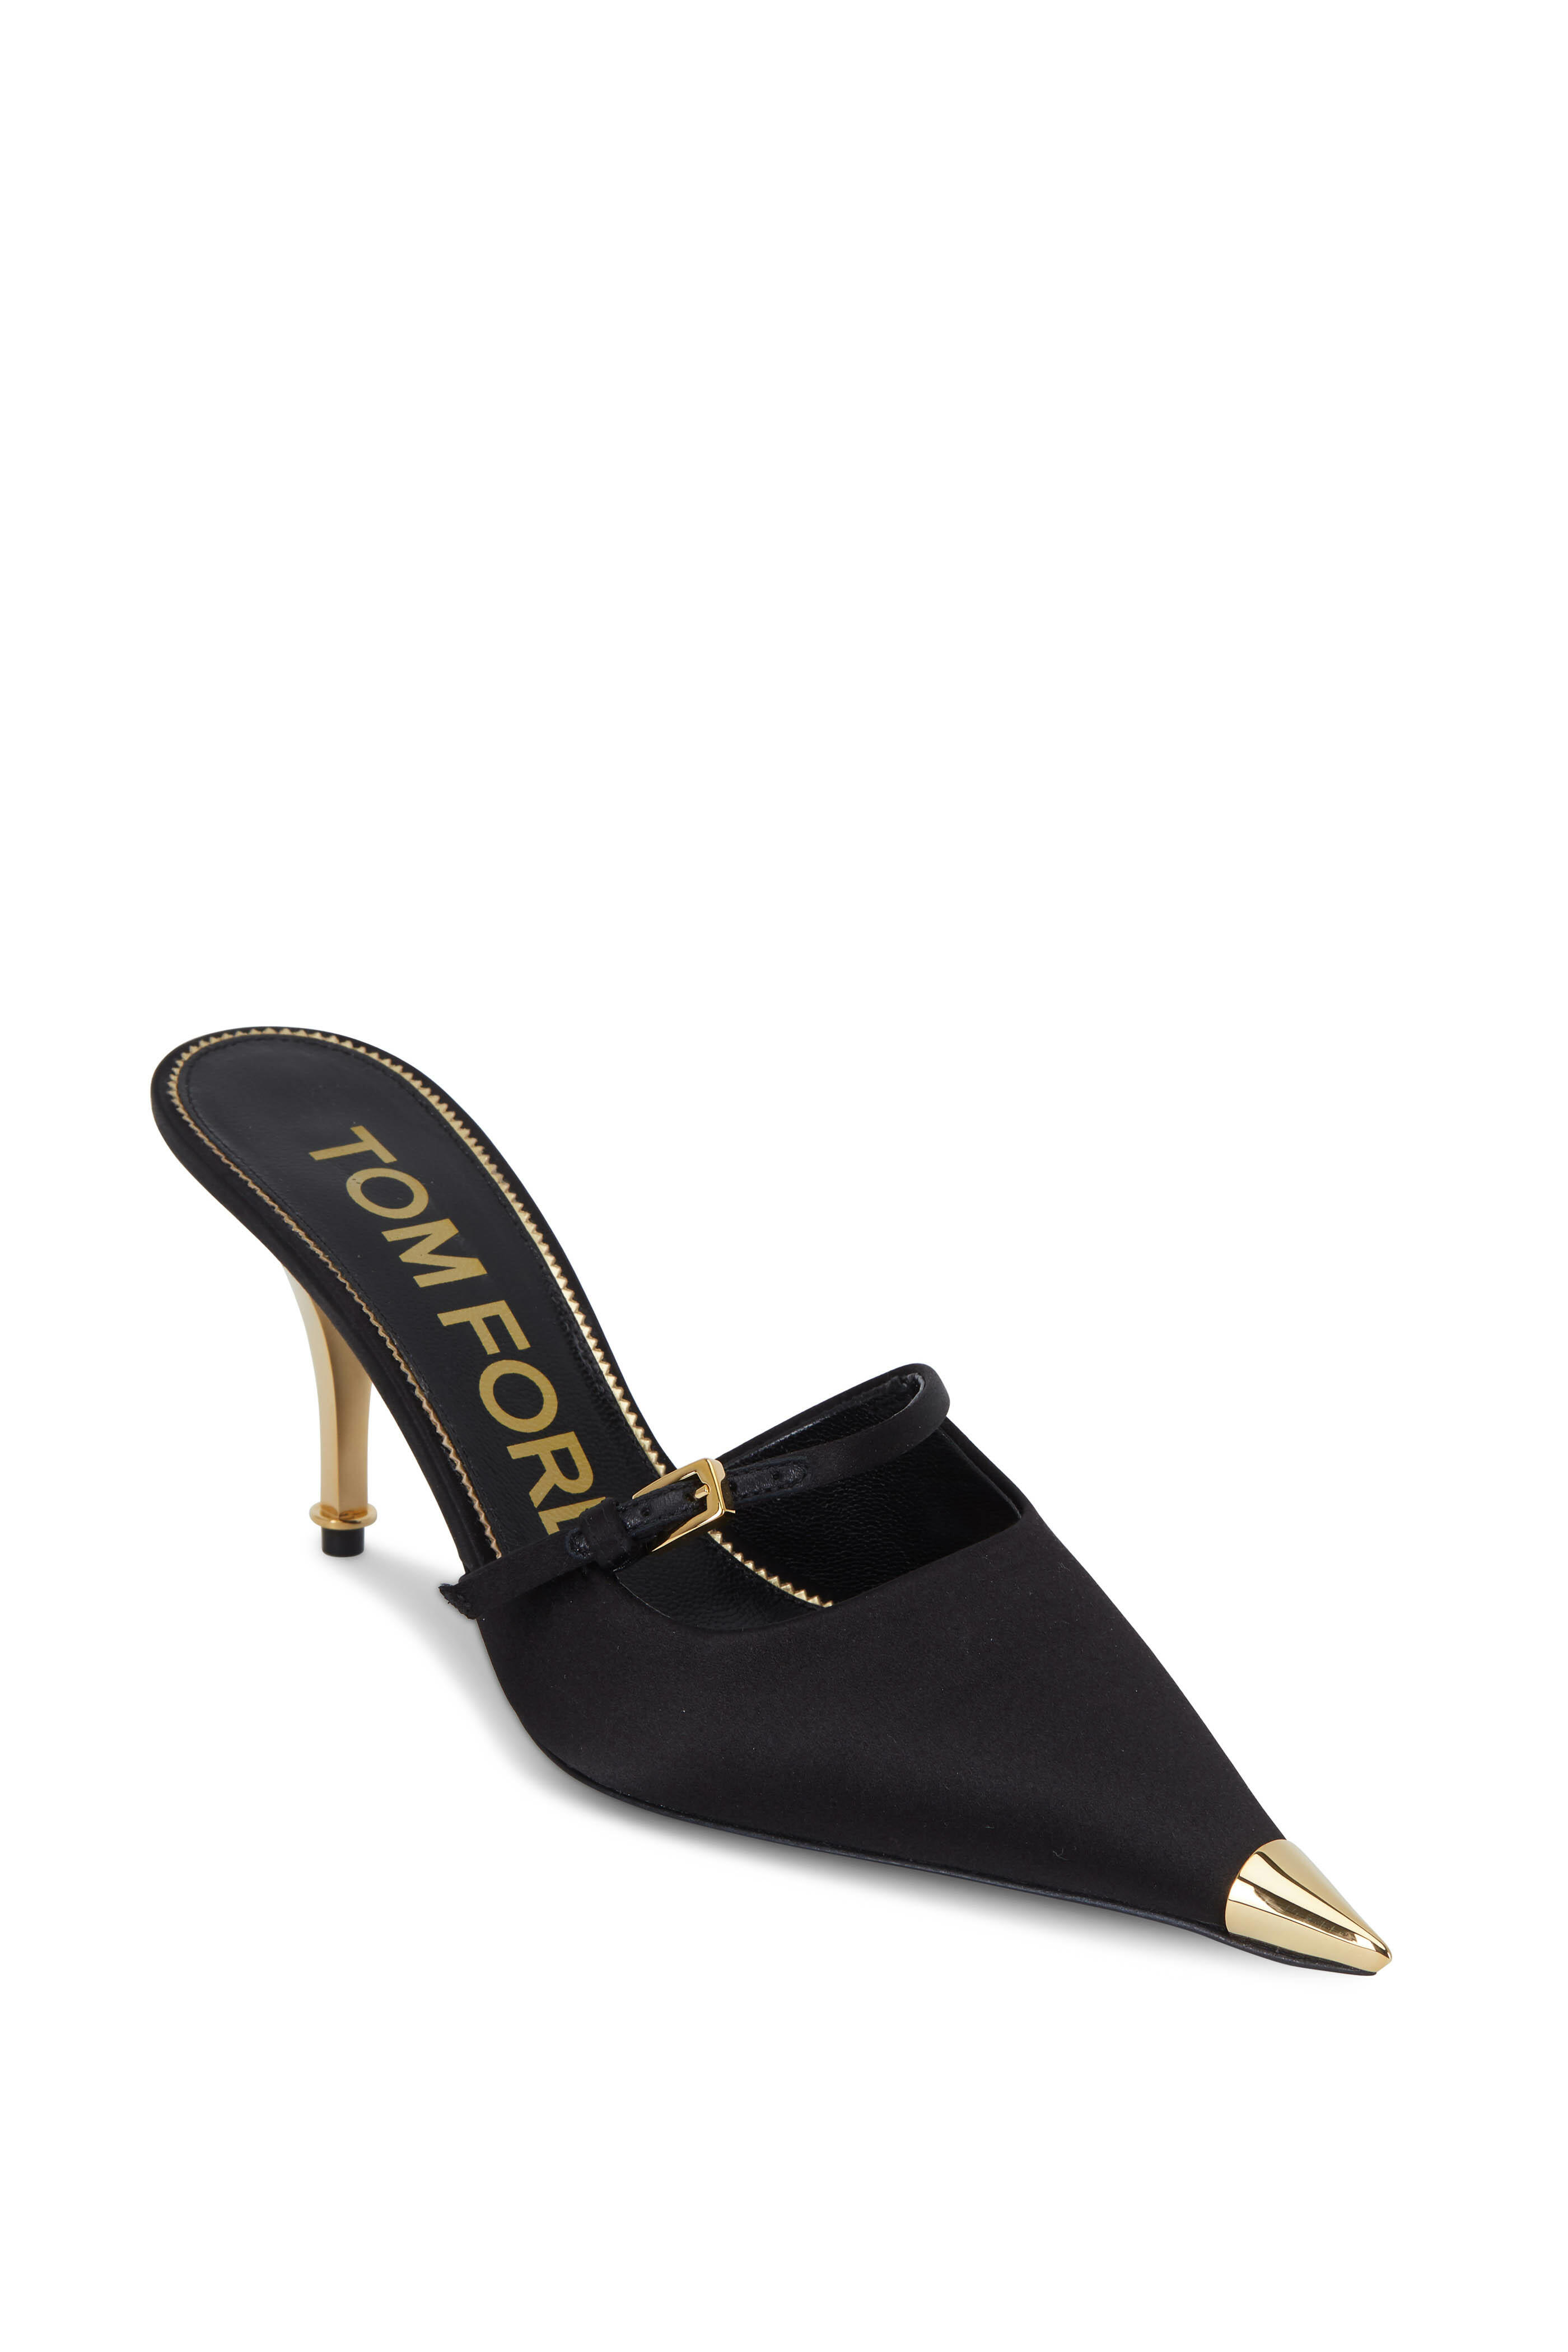 Tom Ford - Black Satin Mary Jane Mule, 75mm | Mitchell Stores